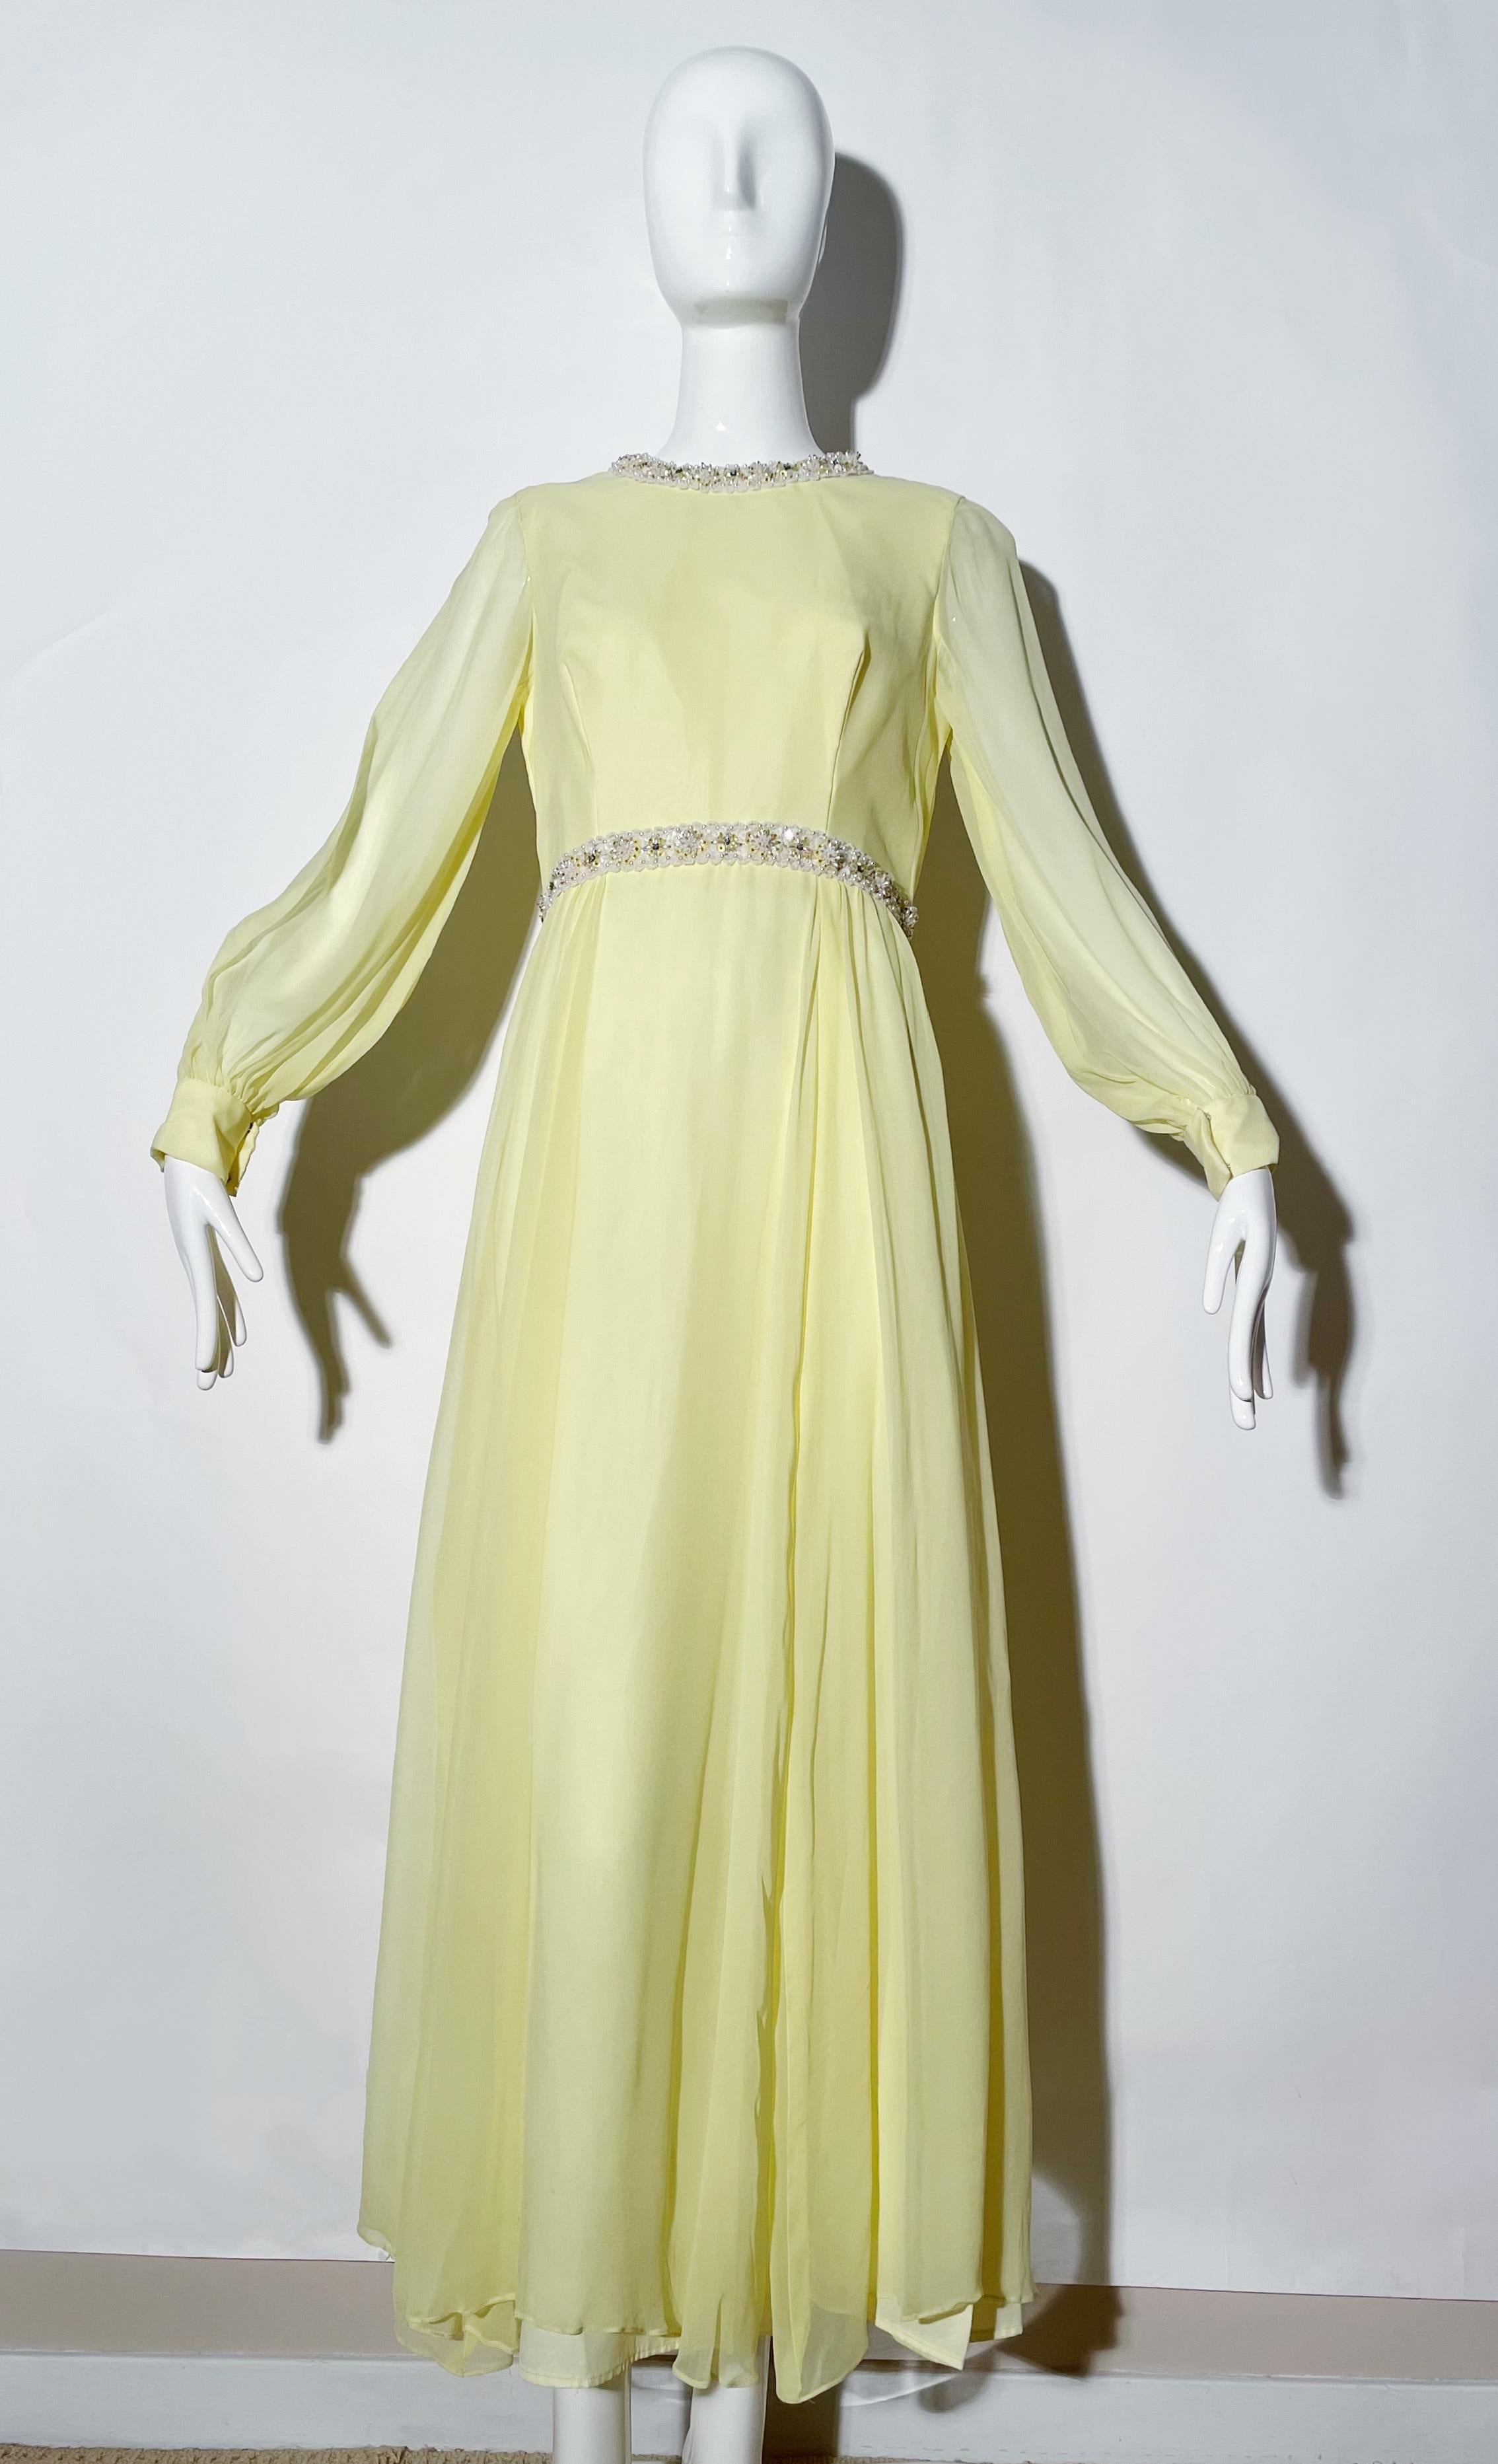 Yellow beaded gown. Longsleeve. Rear zipper closure. Silk. Lined. 
*Condition: excellent vintage condition. No visible flaws.

Measurements Taken Laying Flat (inches)—
Shoulder to Shoulder: 14 in.
Bust: 32 in.
Waist: 30 in.
Hip: 34 in.
Length: 52